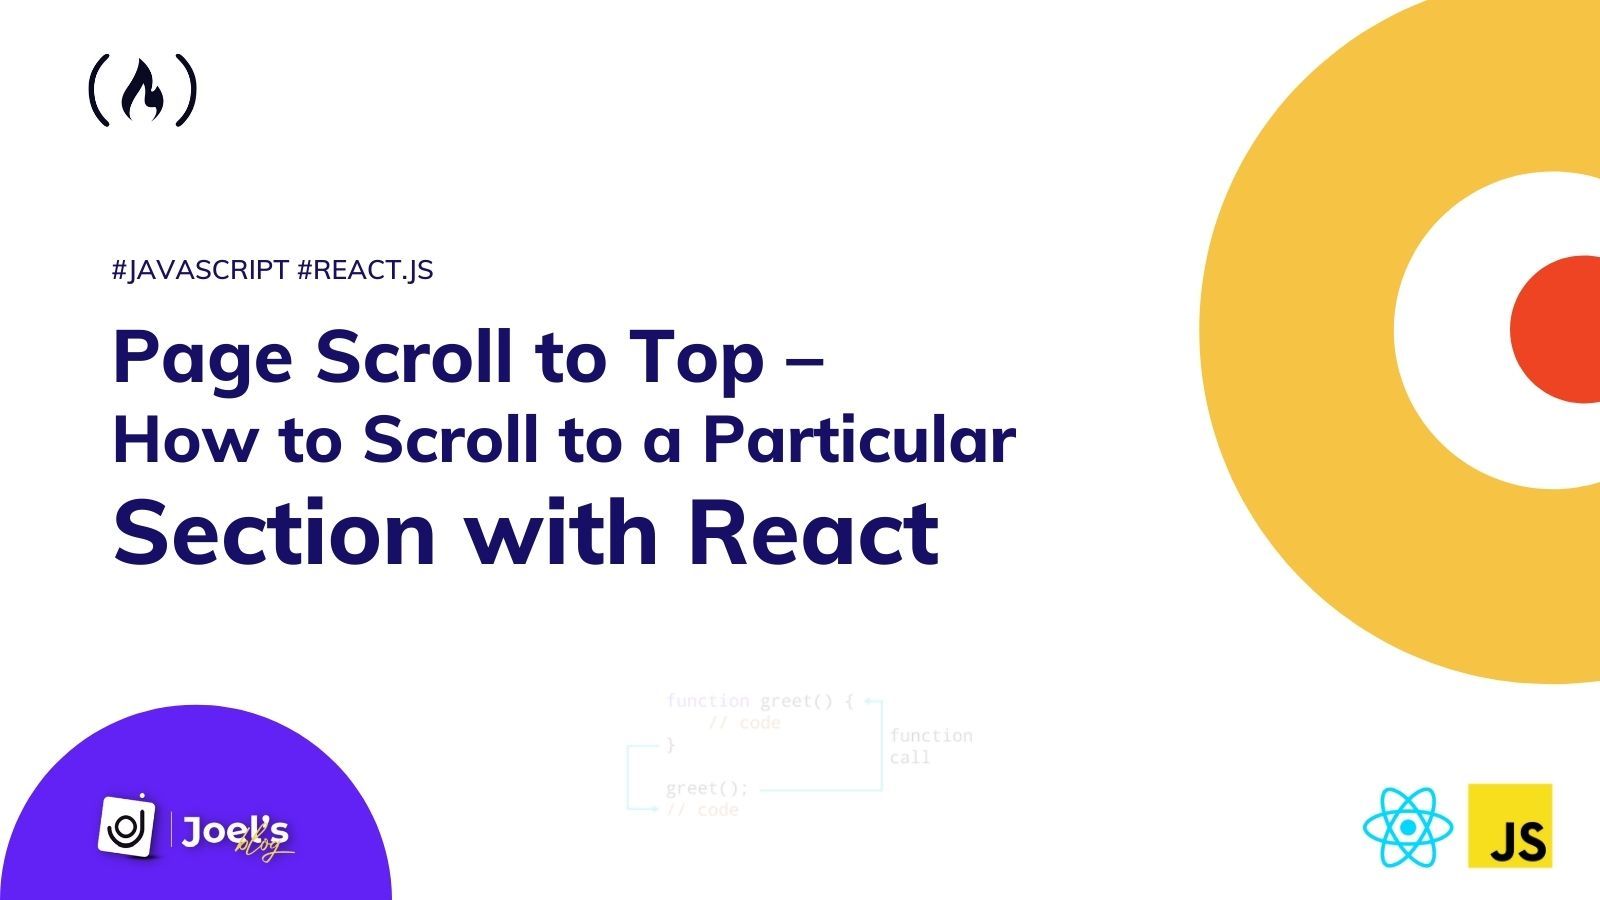 Page Scroll to Top – How to Scroll to a Particular Section with React